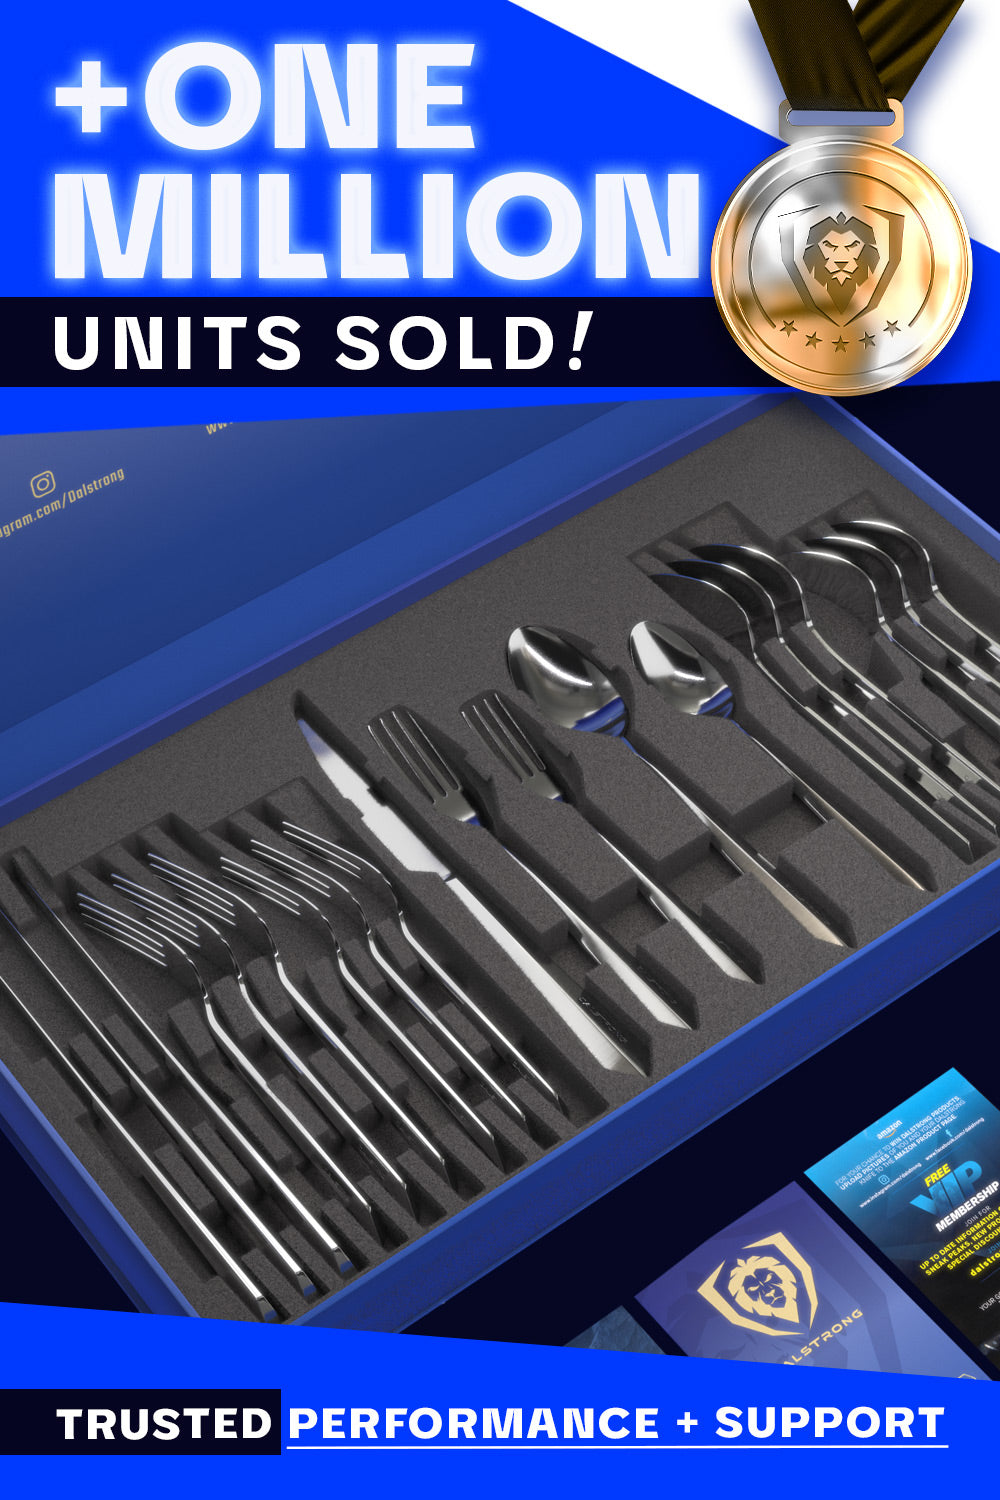 Dalstrong 20 piece flatware cutlery set silver stainless steel service for 4 inside it's premium packaging.